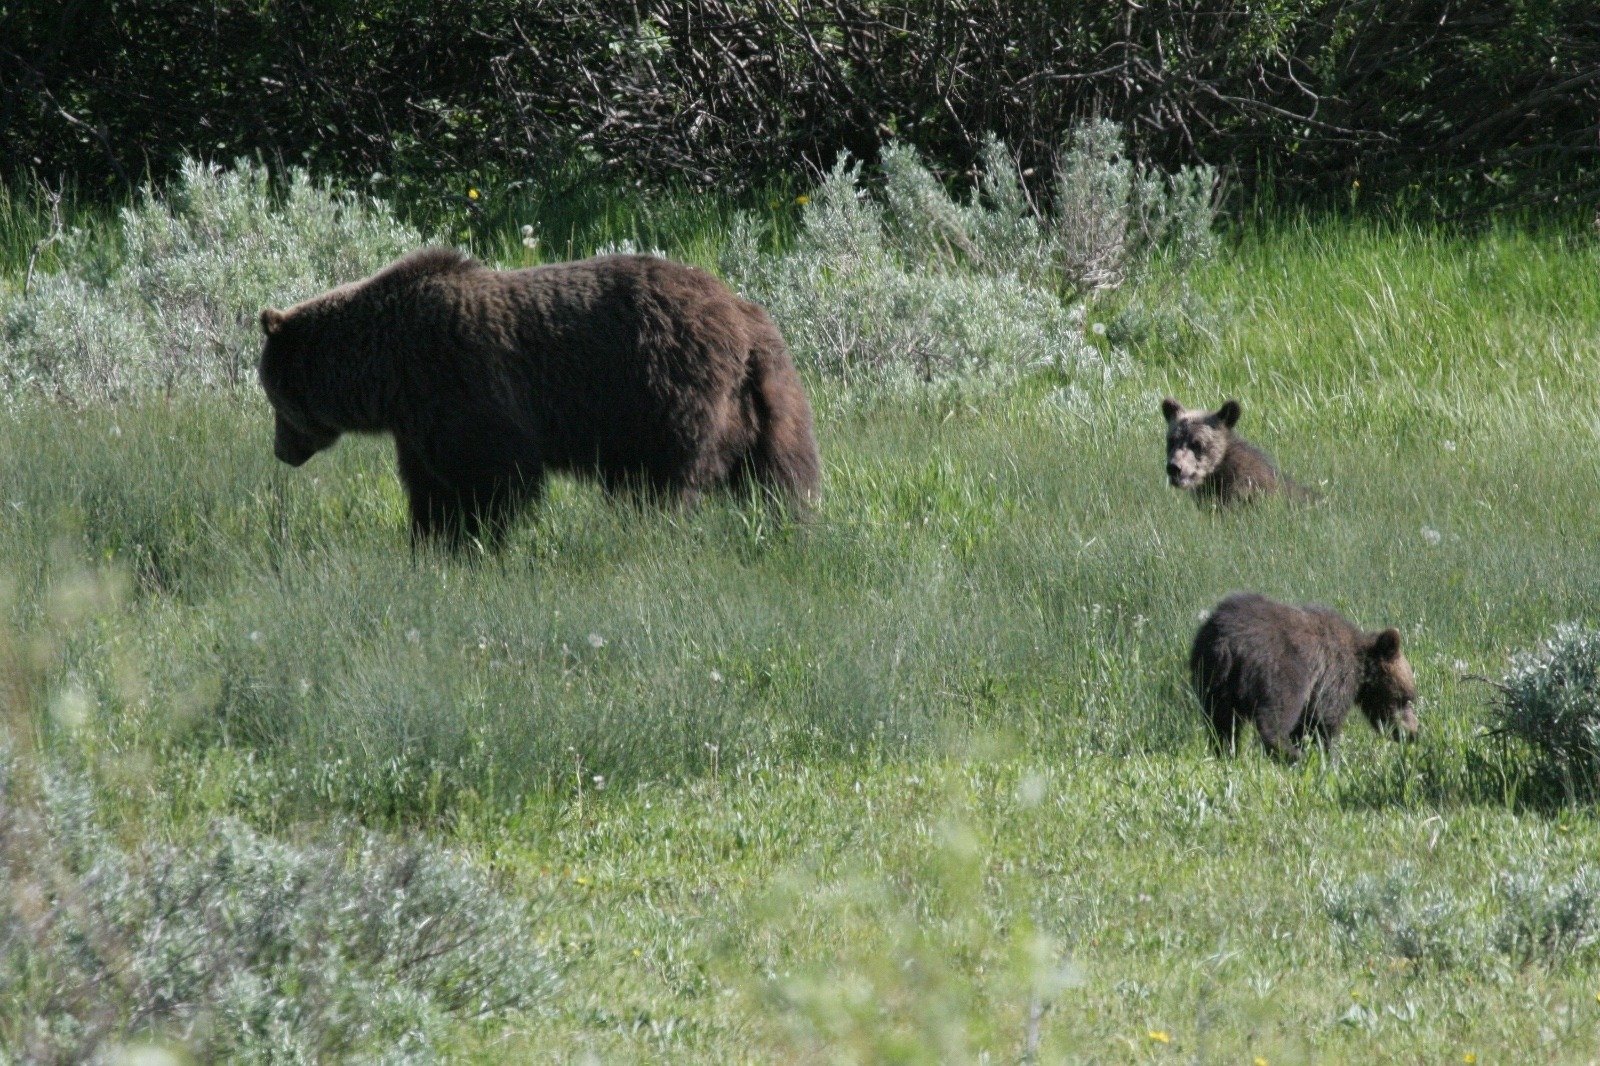 Jackson Hole grizzly mother 399 and one of her broods of cubs. Photo by Lance Craighead